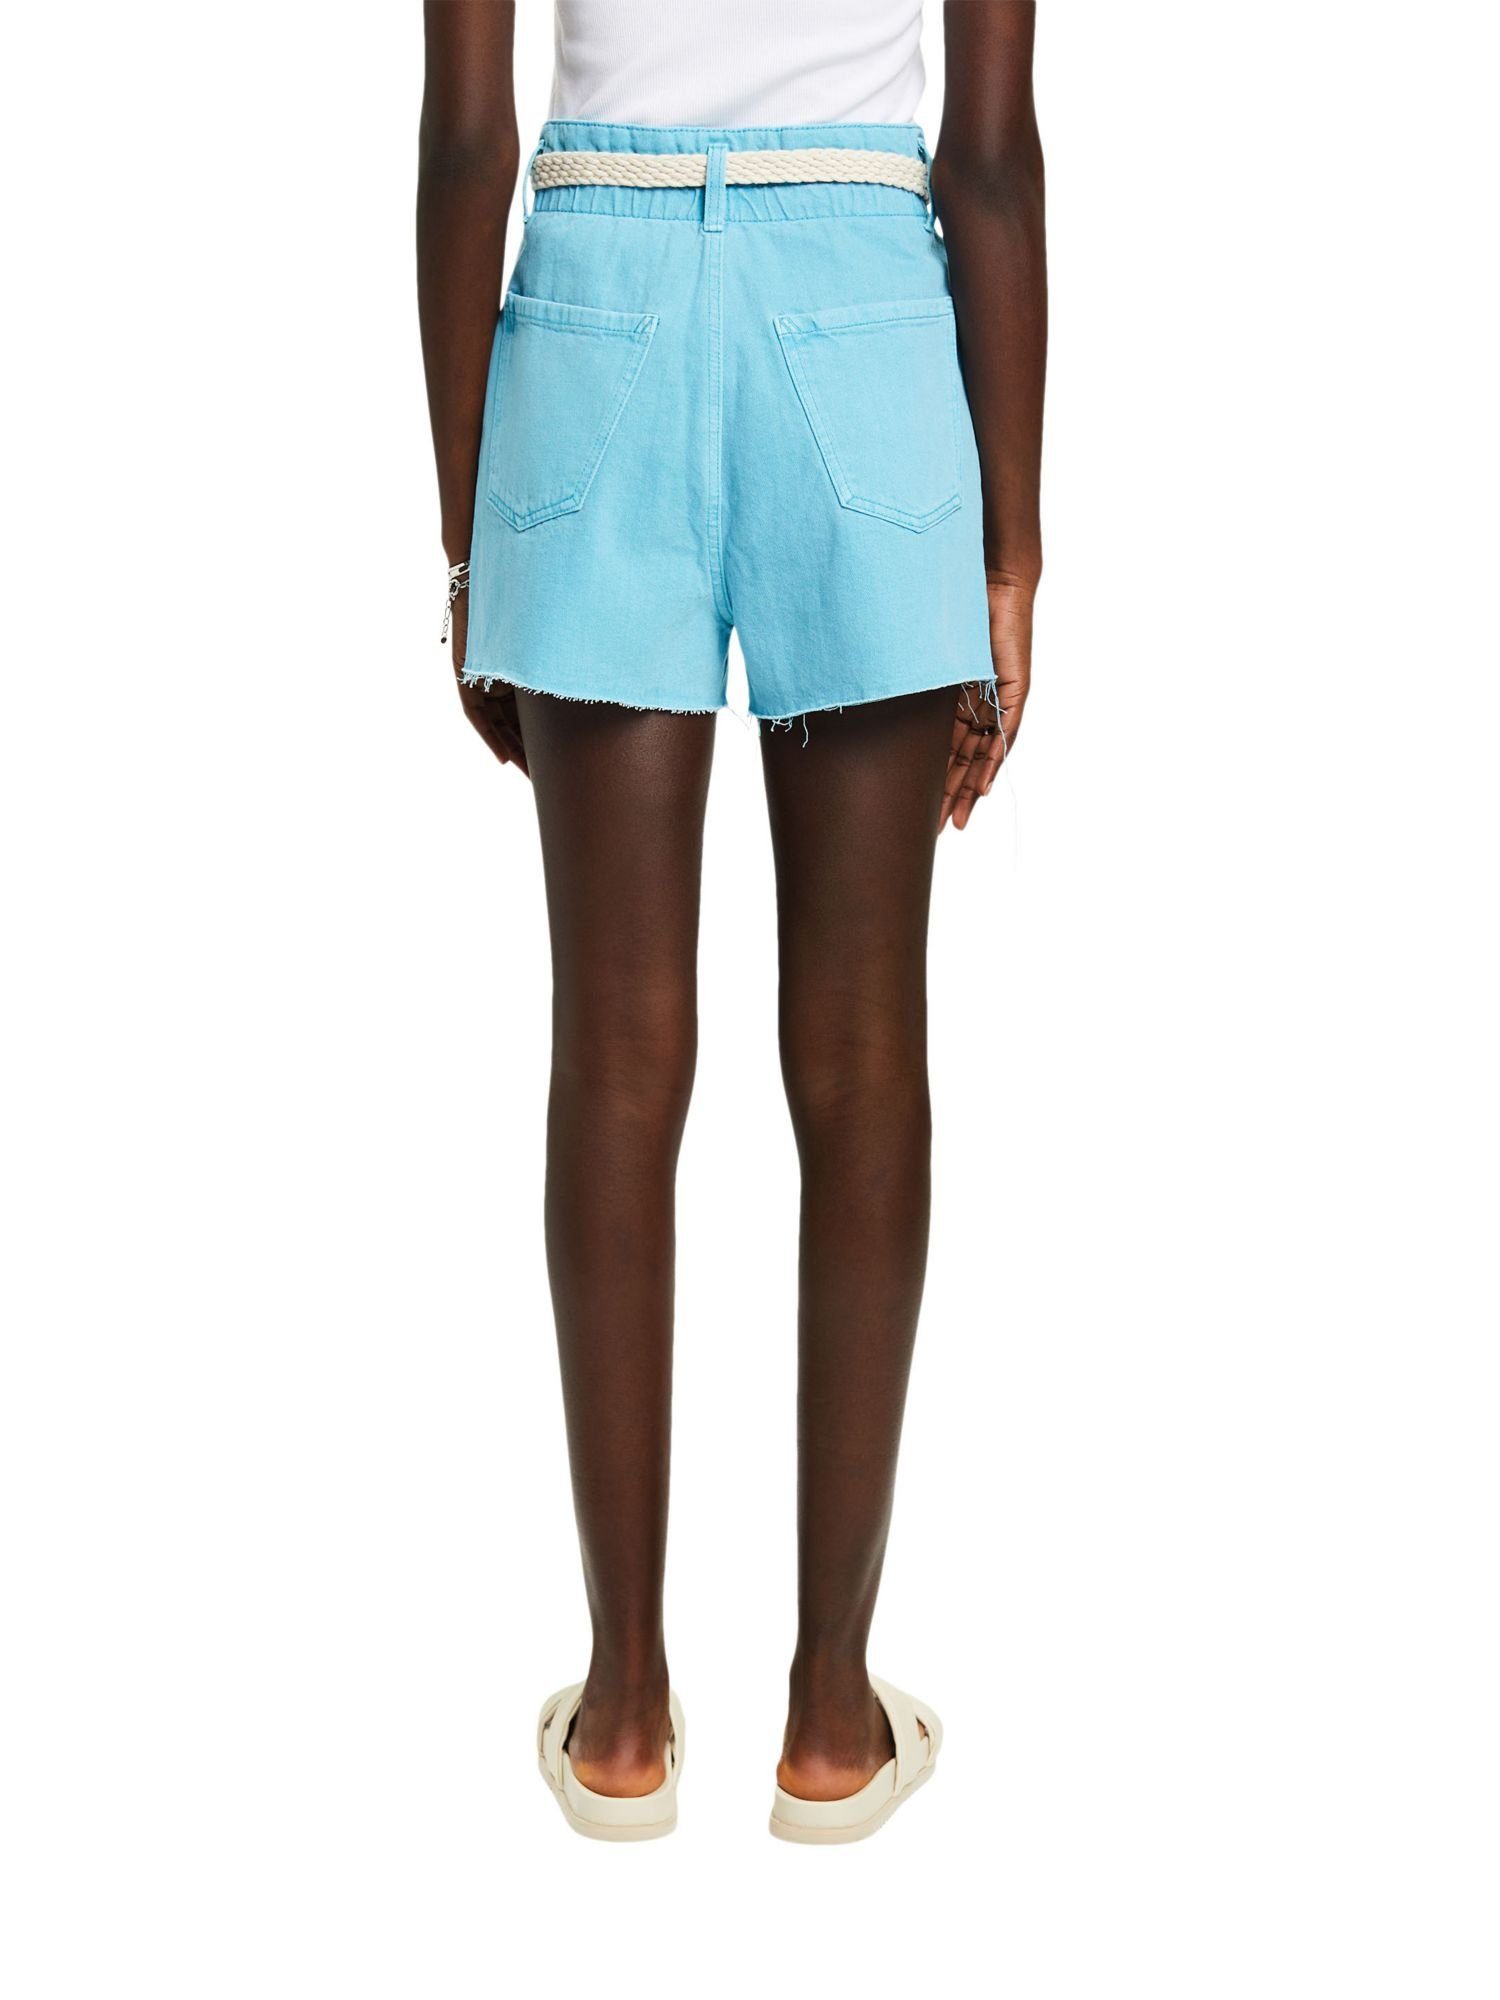 edc by Esprit Shorts Optik TURQUOISE abgeschnittener Jeansshorts in (1-tlg)